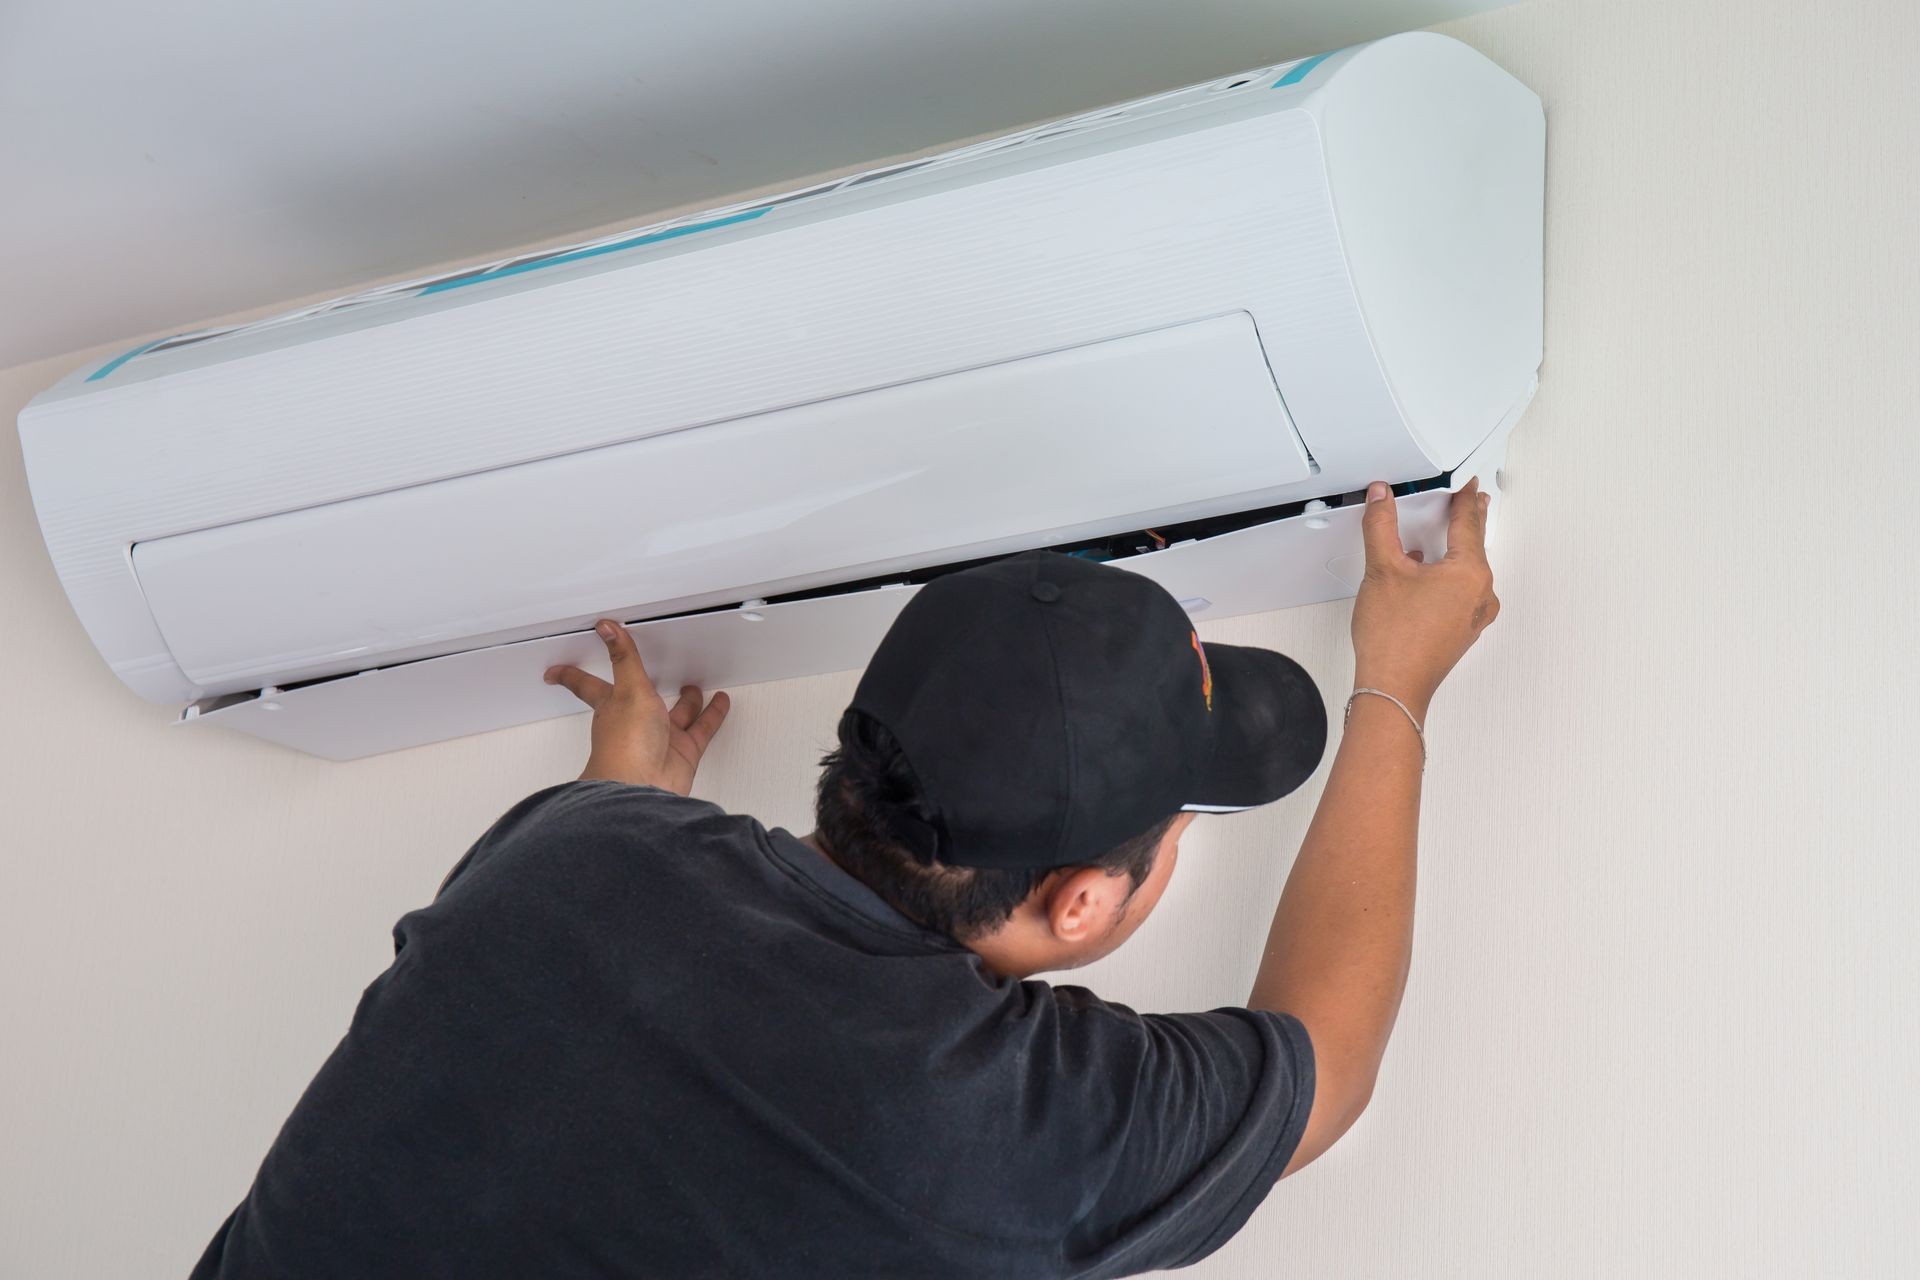 Man worker installs indoor air conditioner in the new home. Select focus